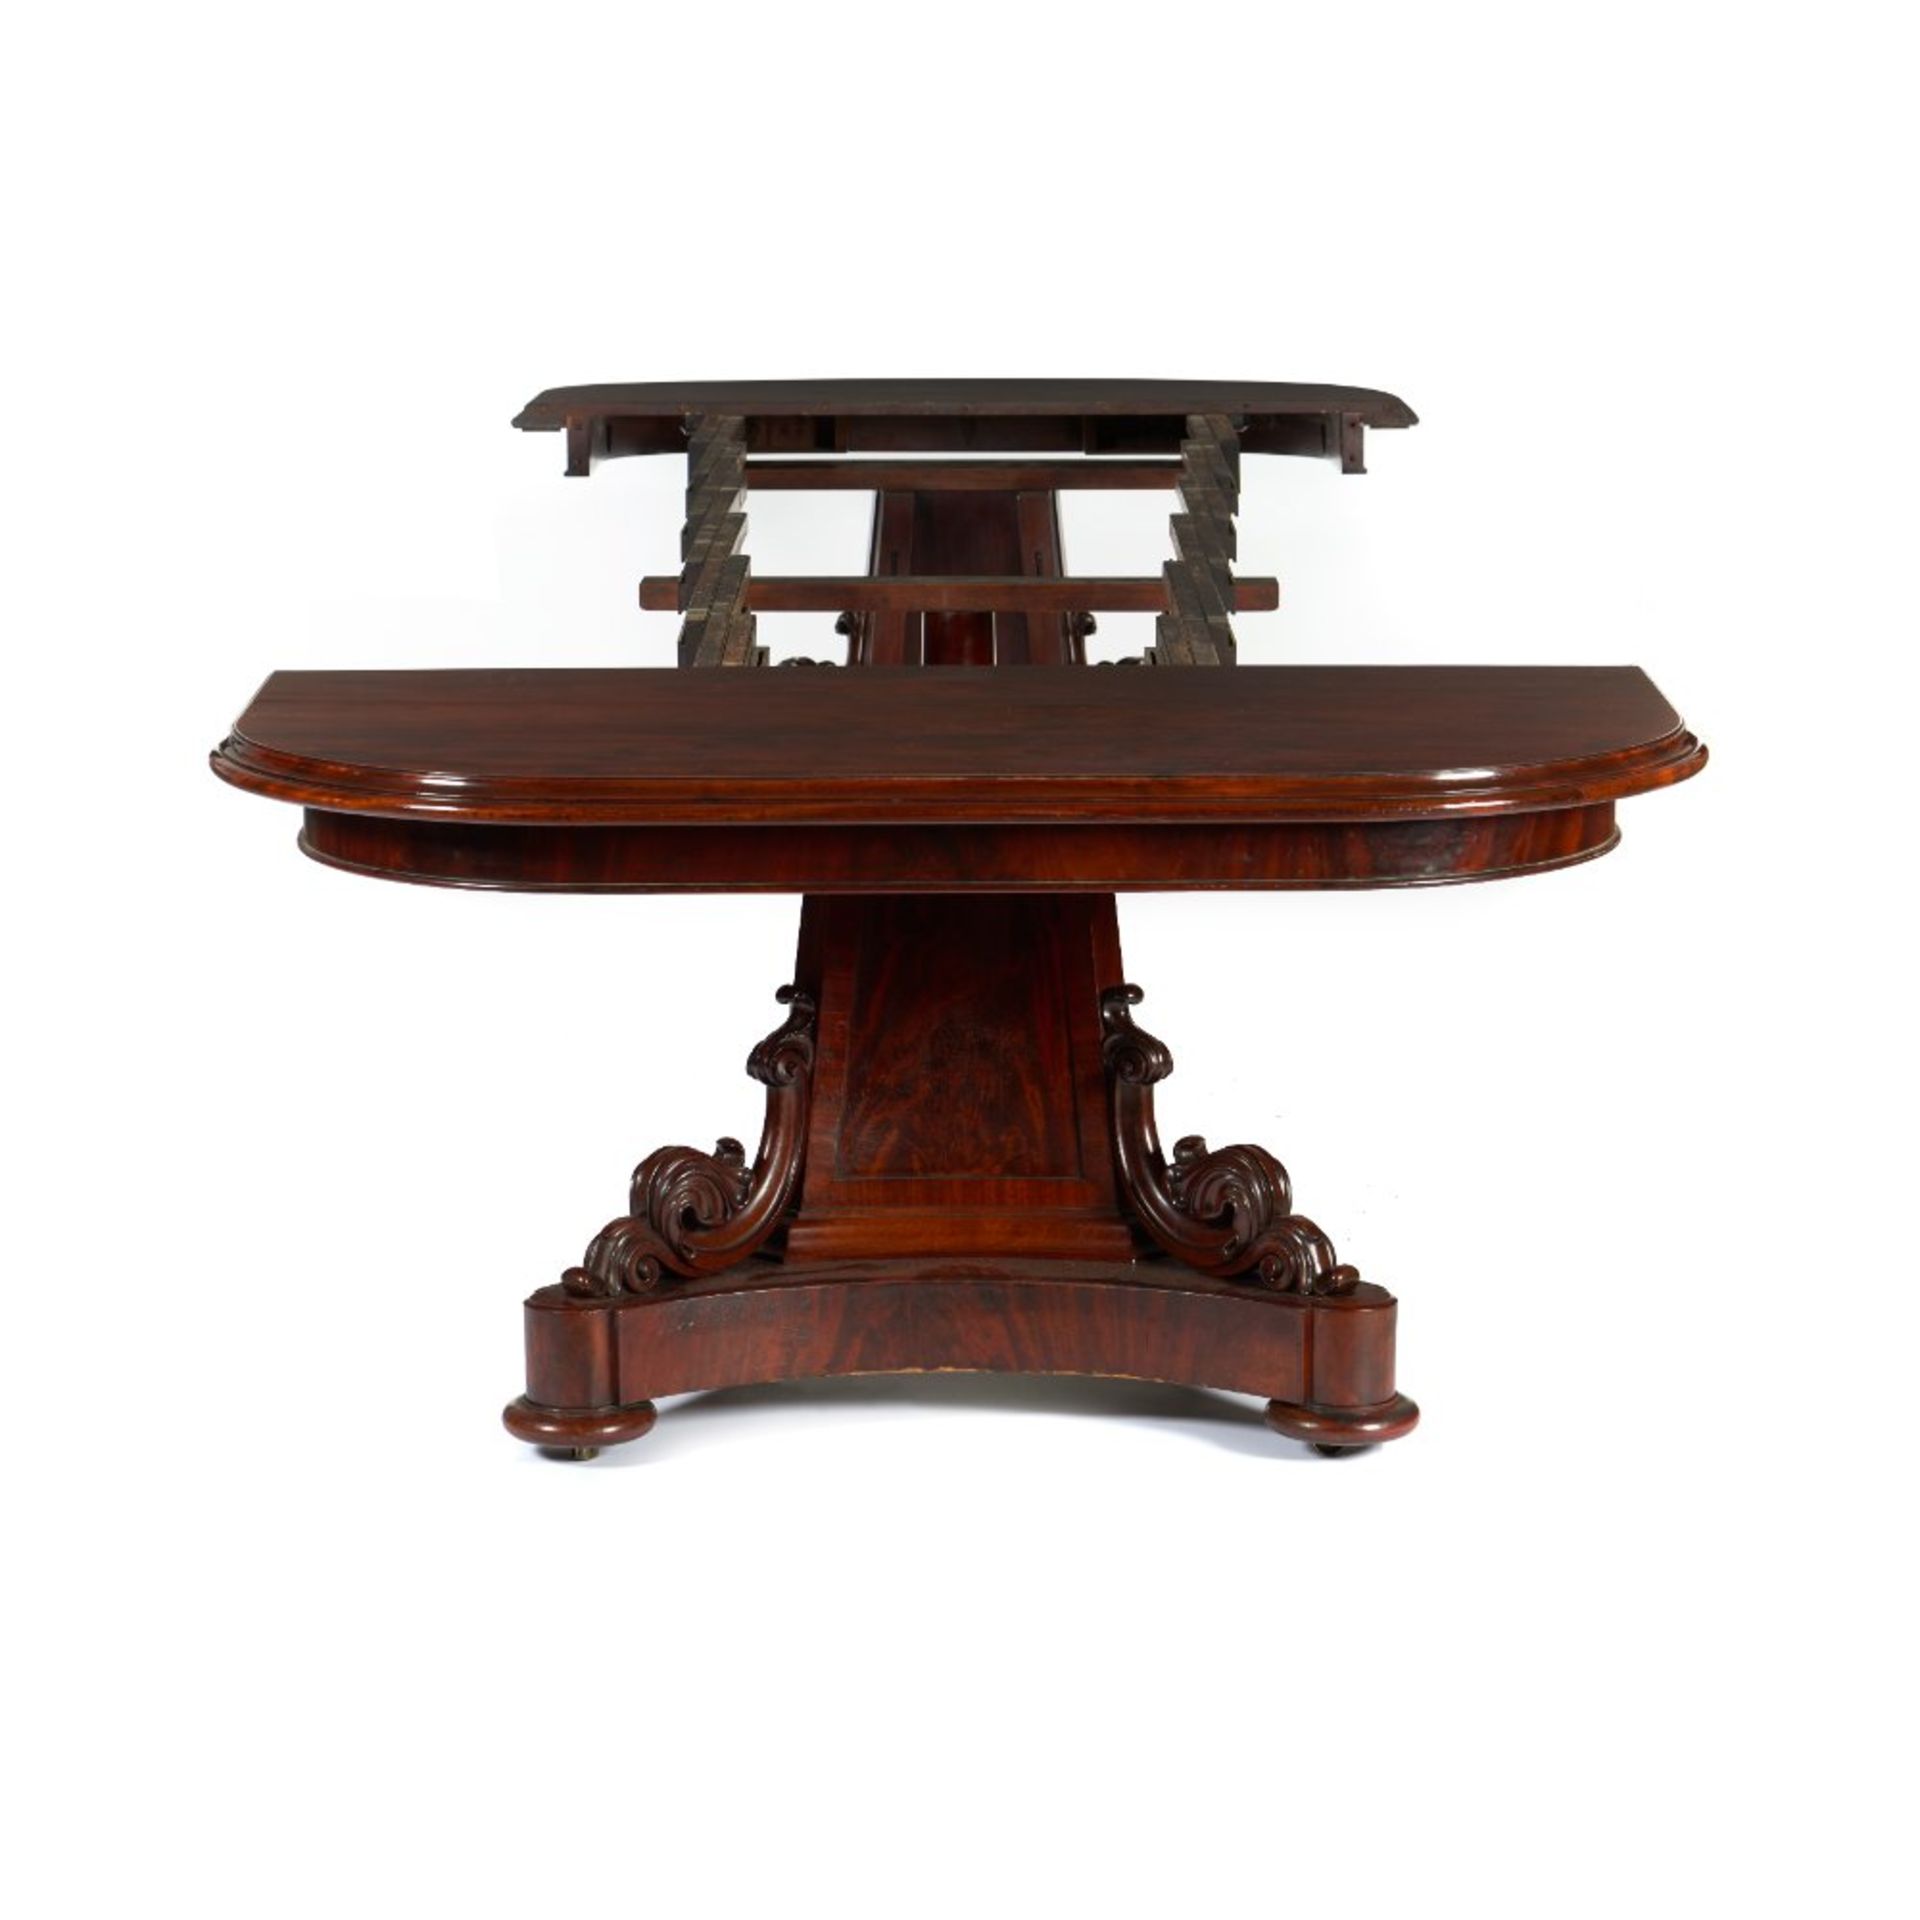 An William IV Dining Table - Image 3 of 6